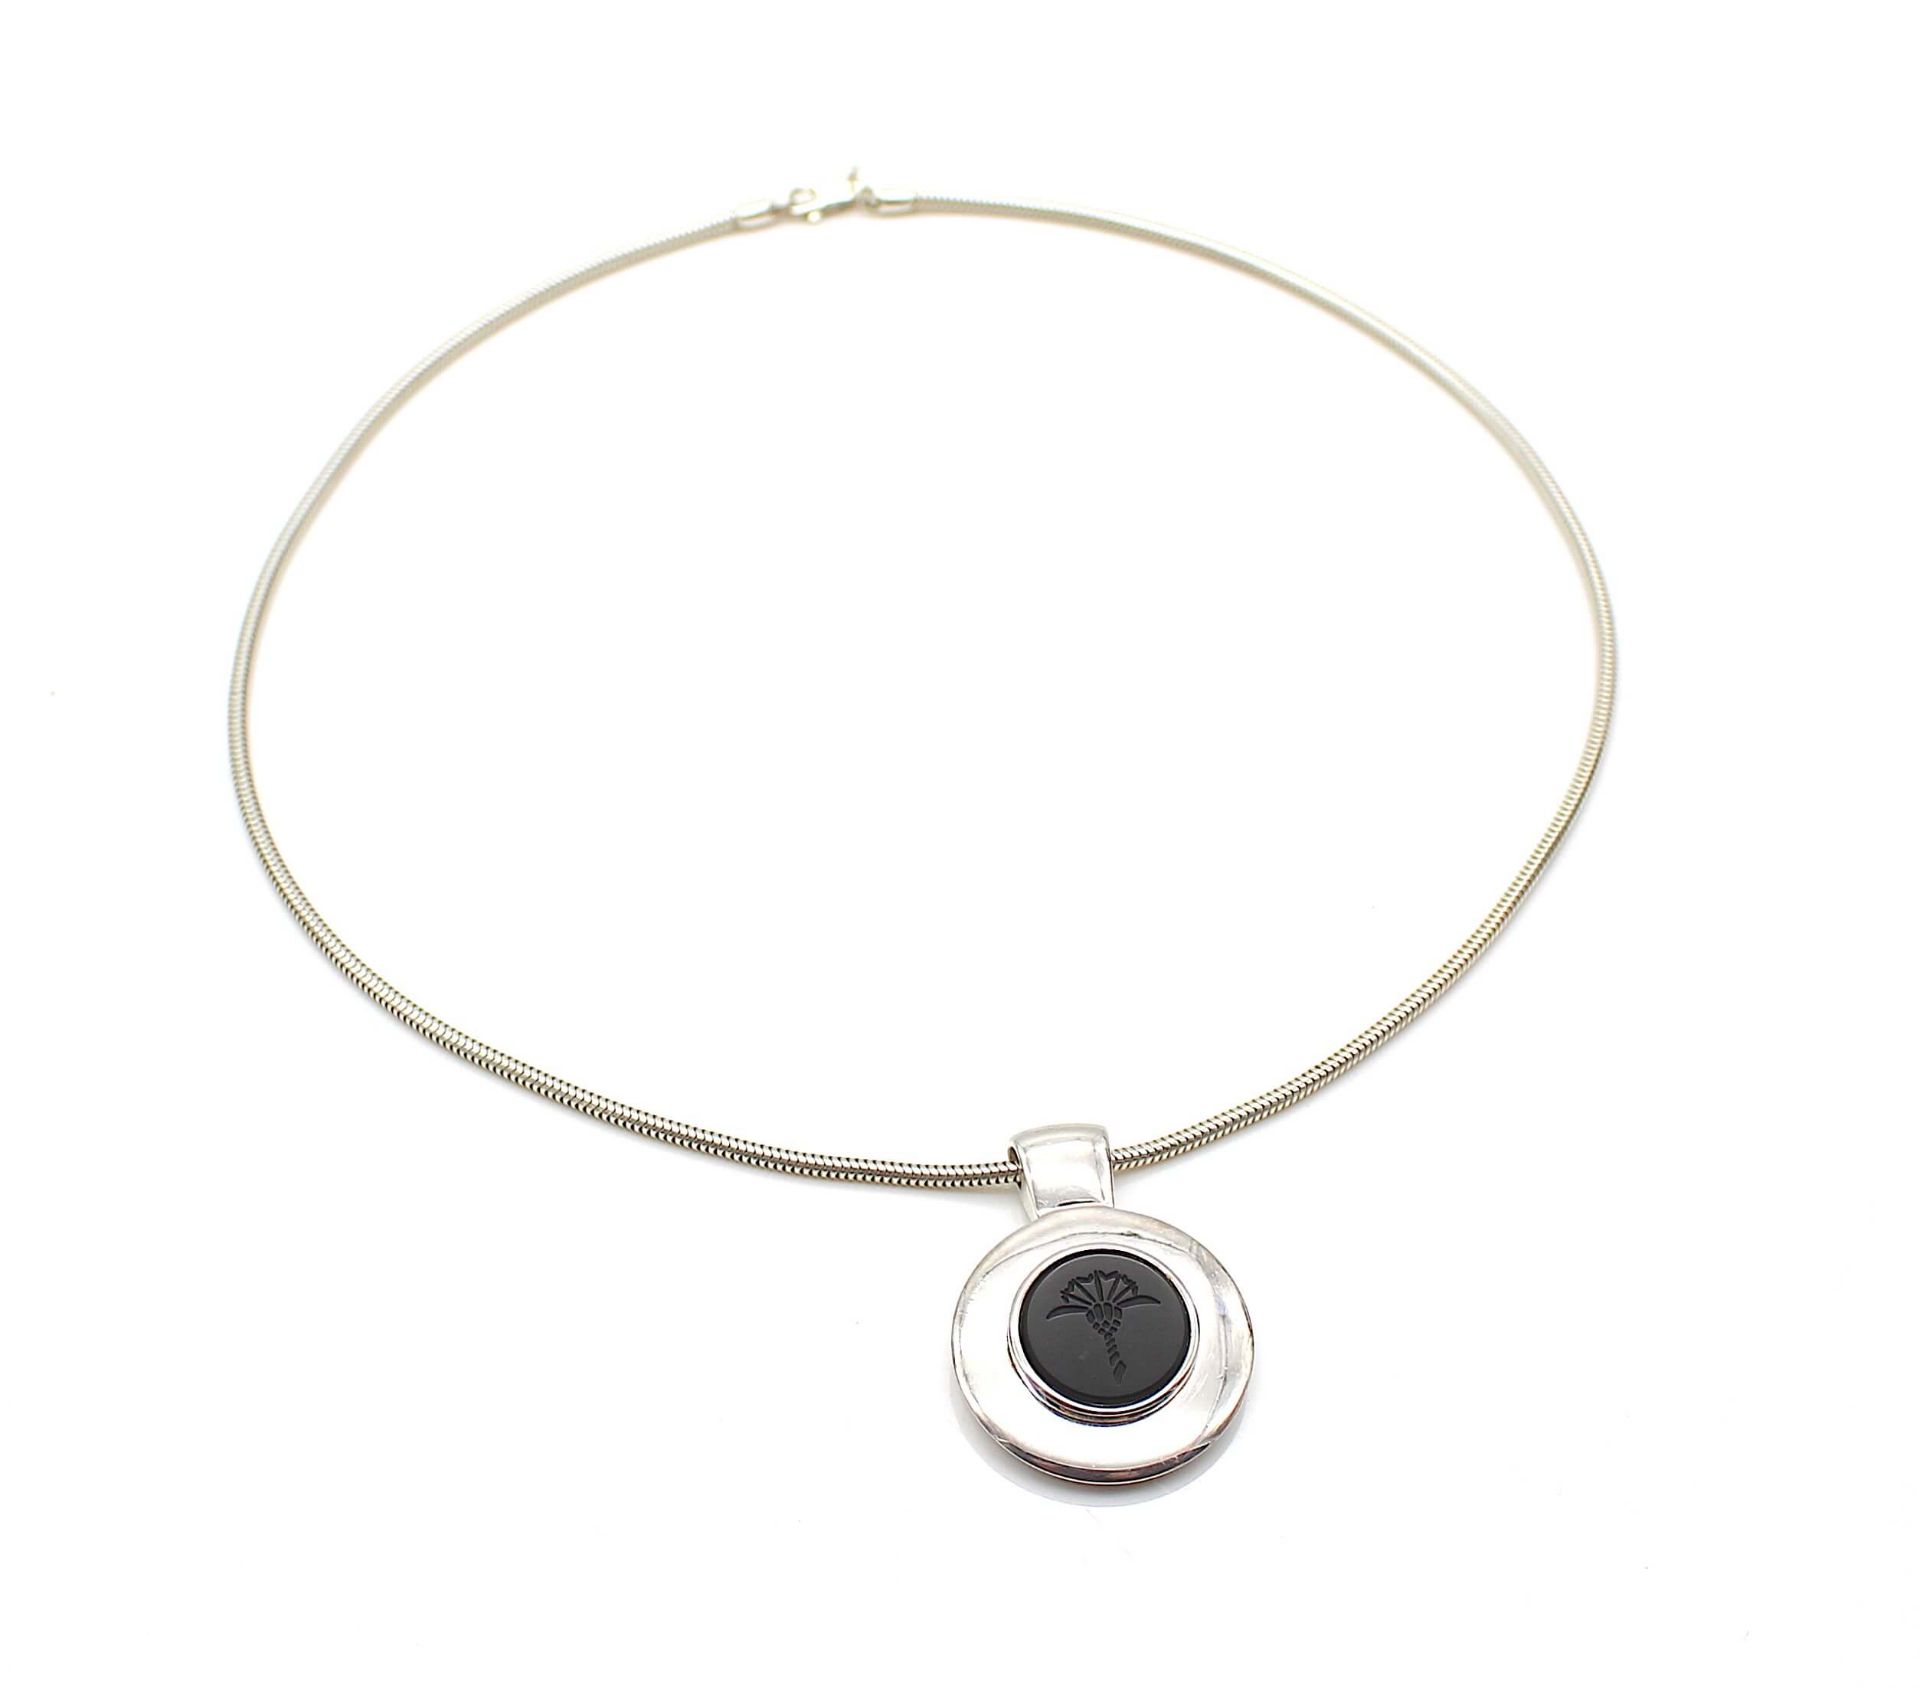 Necklace with a pendant by Joop made of 925 silver and an onyx.Weight 23 g, chain length 42 cm, - Bild 2 aus 3